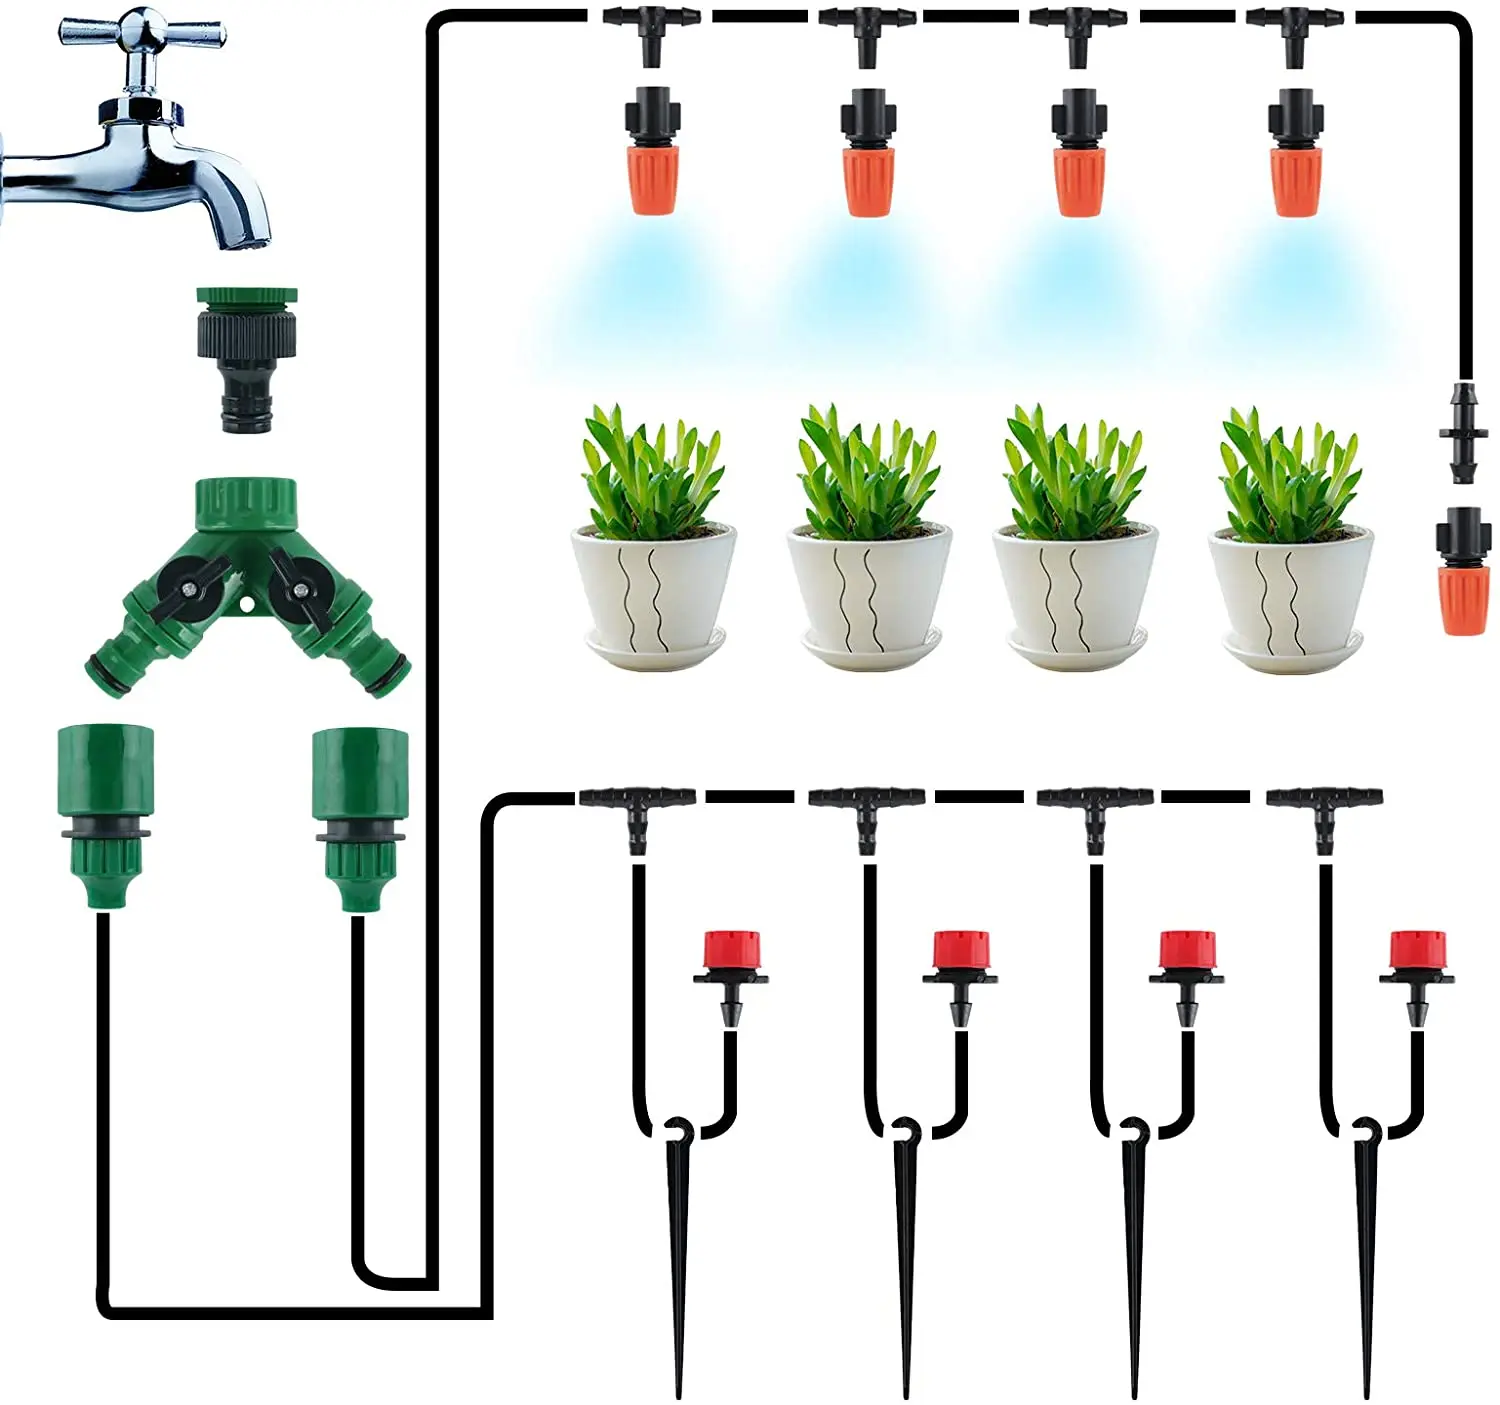 

360 Degree Water Flow Drip Irrigation System Adjustable Irrigation Dripper Emitters PVC Other Watering & Irrigation 0-0.4mpa